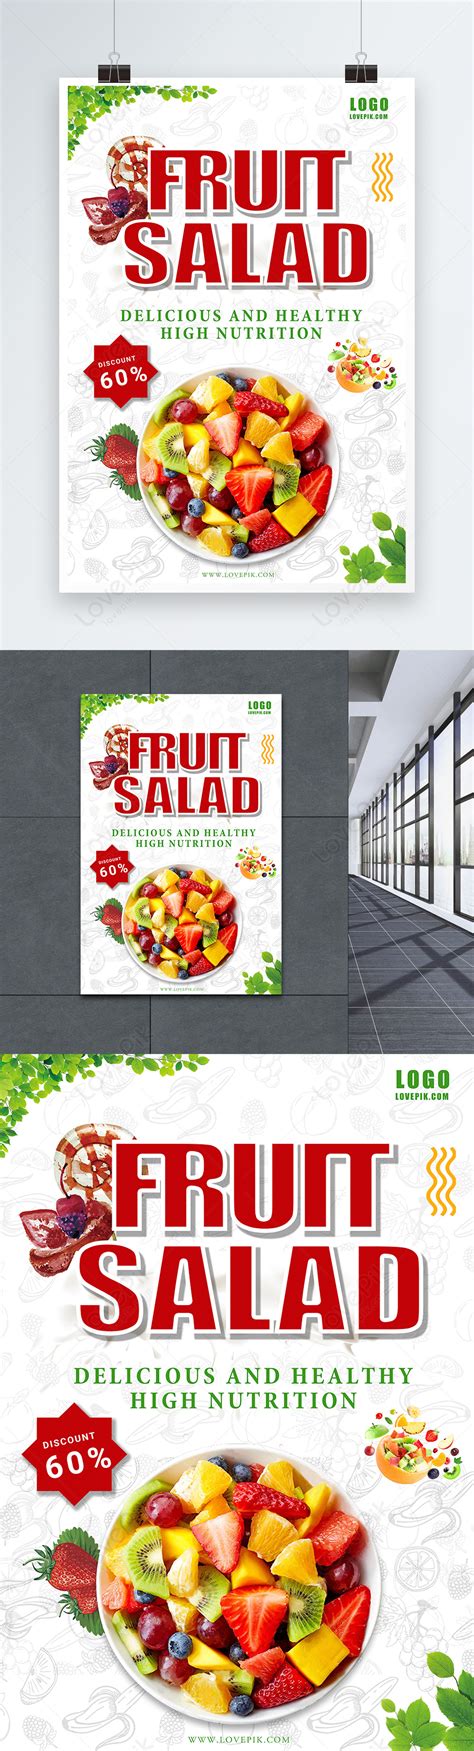 Delicious Fruit Salad Poster Template Imagepicture Free Download